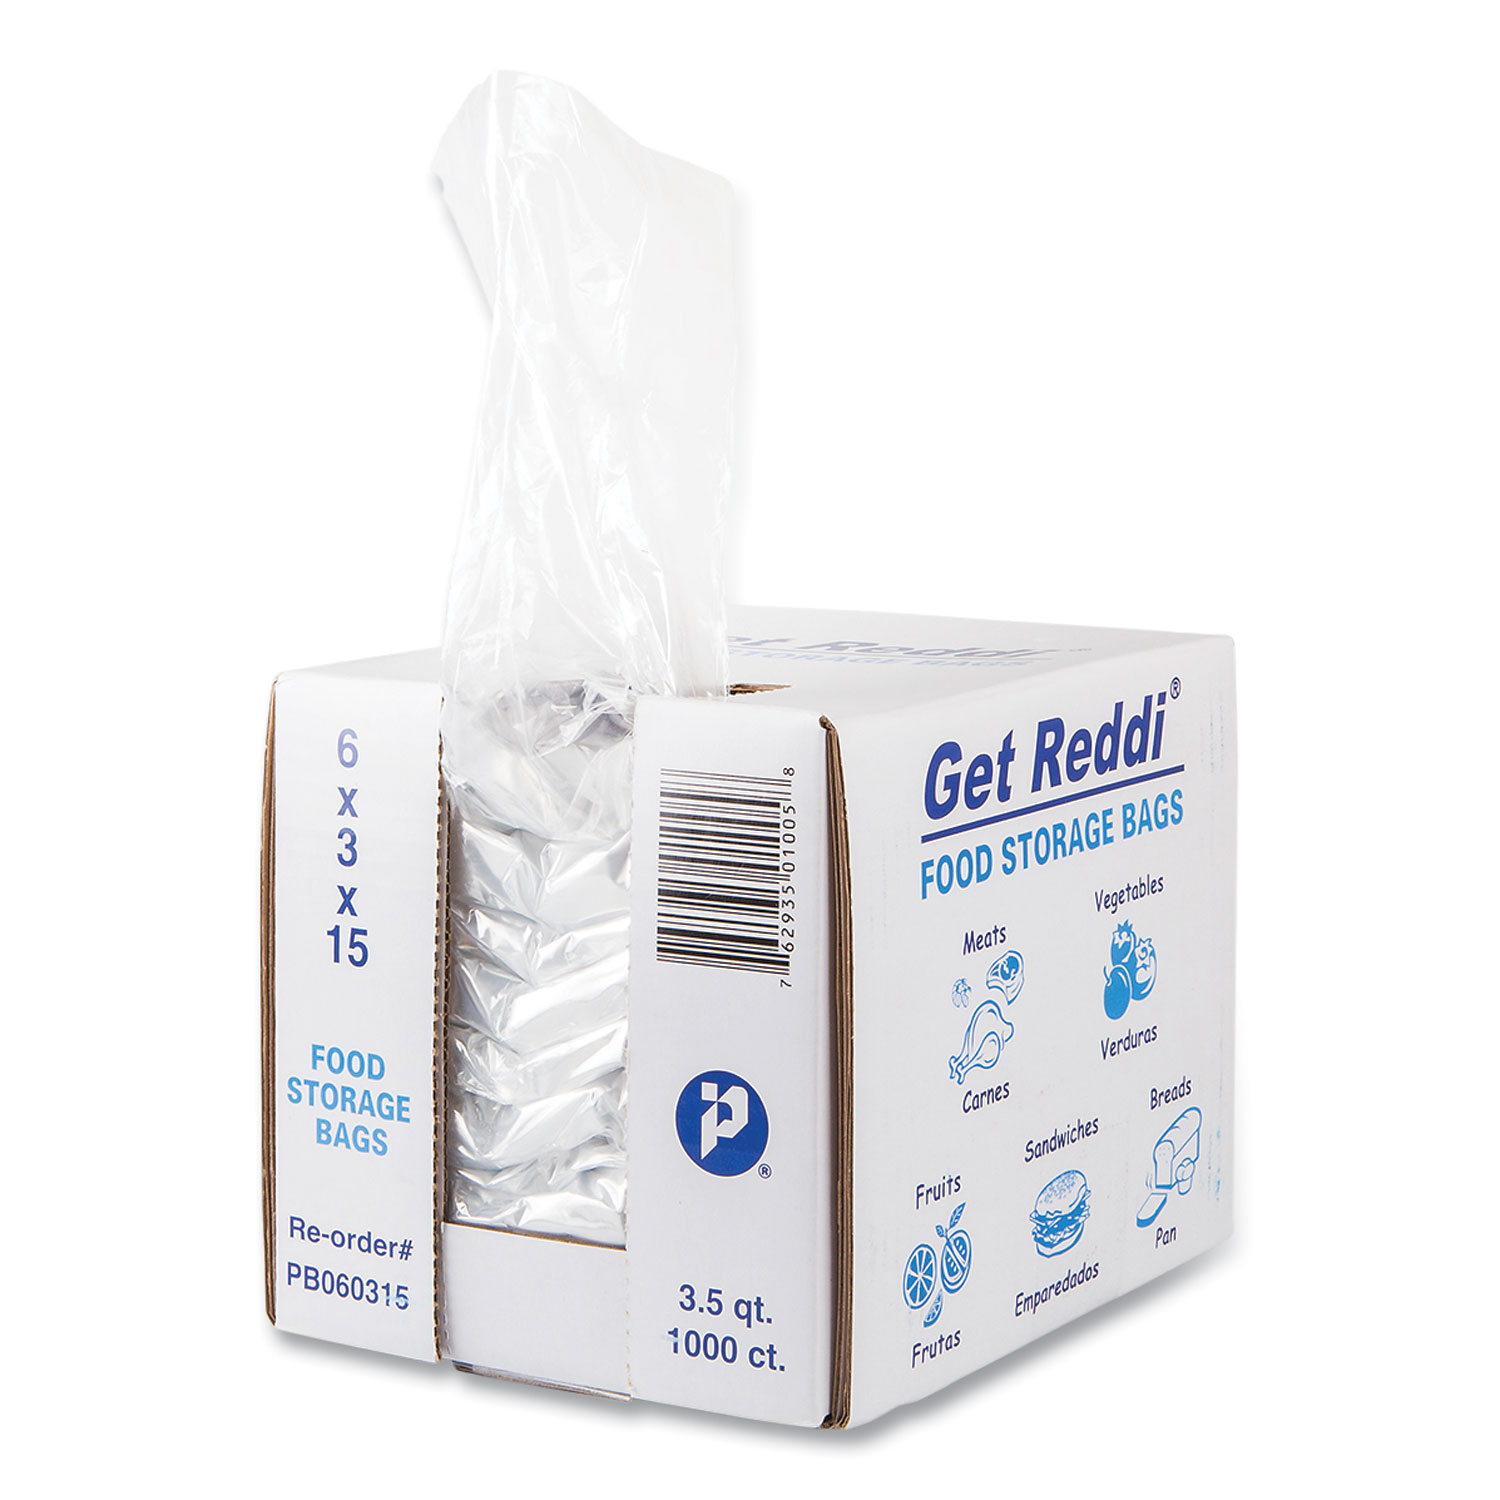 Inteplast Group PB080418H 8-Quart 1 Mil. 8 in. x 18 in. Food Bags - Clear (1000/Carton)